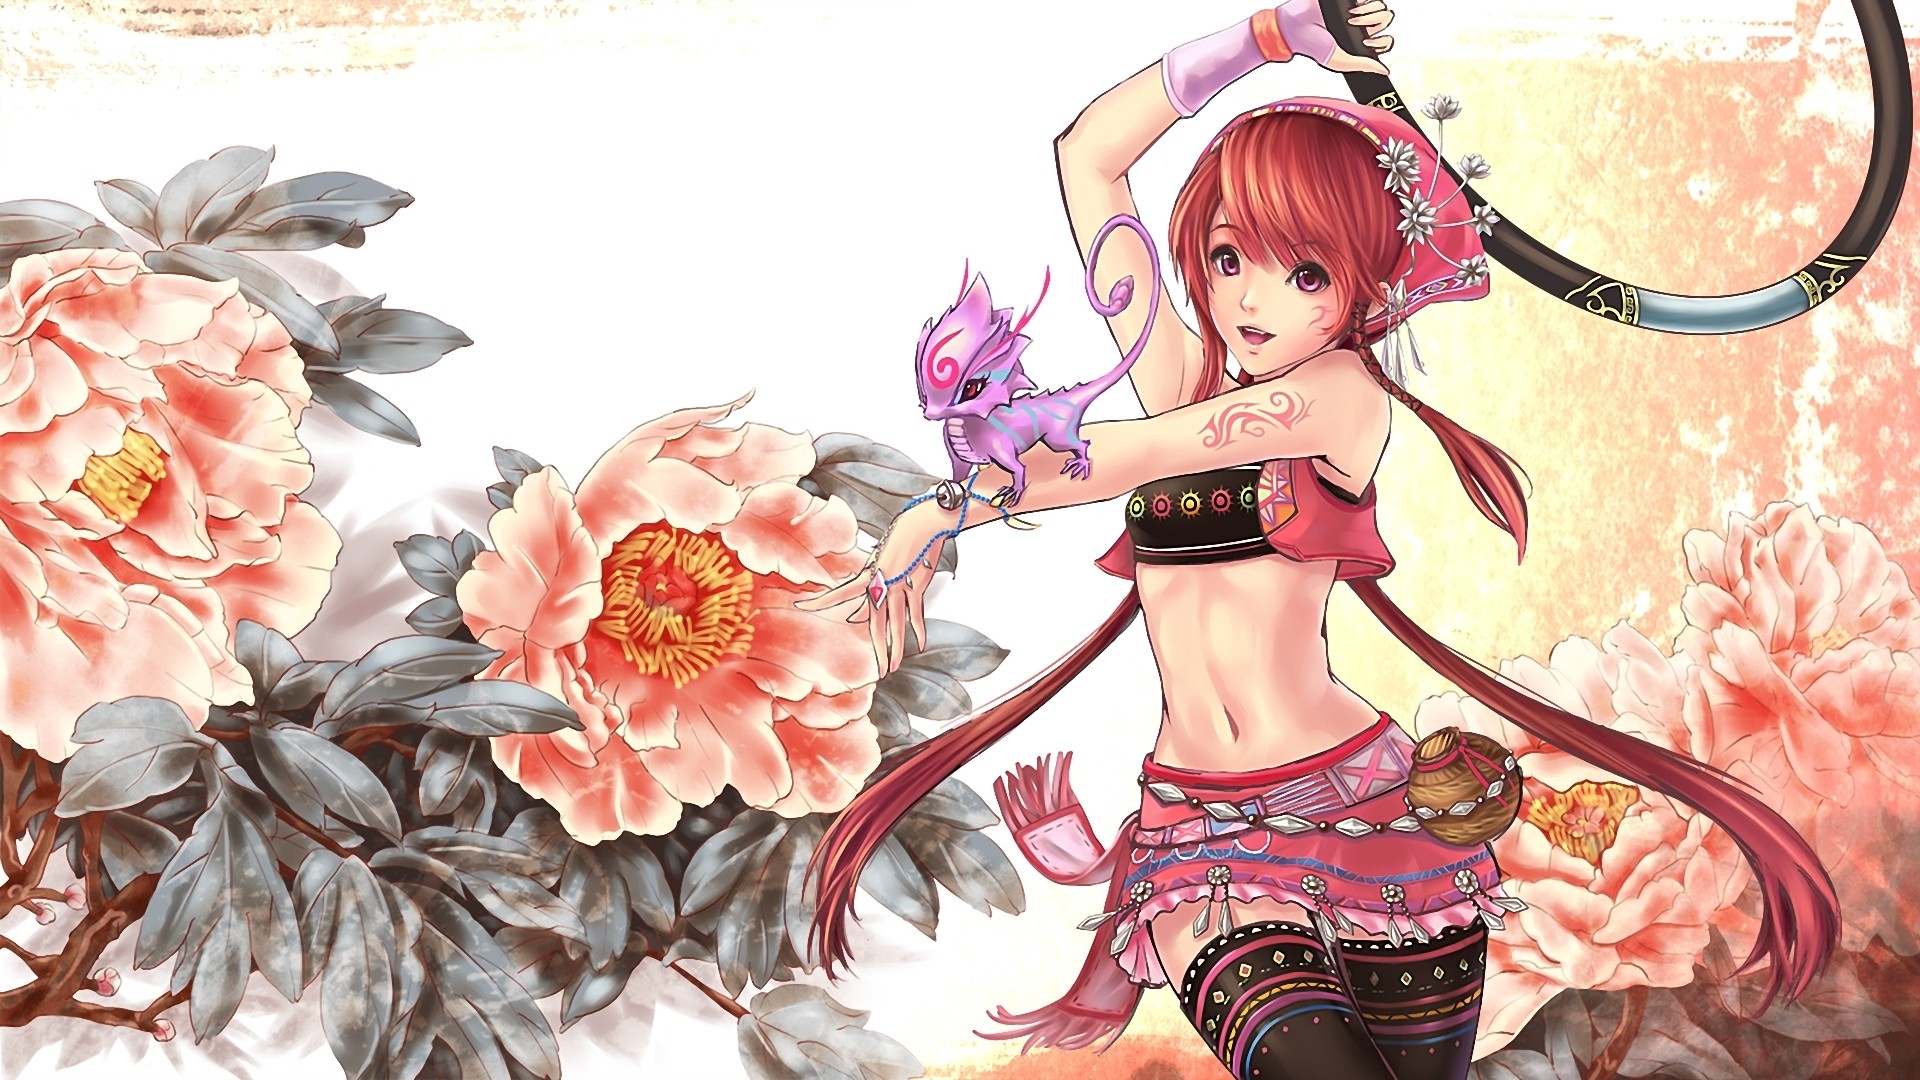 Anime 1920x1080 anime anime girls redhead original characters soft shading belly button flowers belly dragon creature plants stockings long hair purple eyes inked girls simple background beige background Chinese dragon